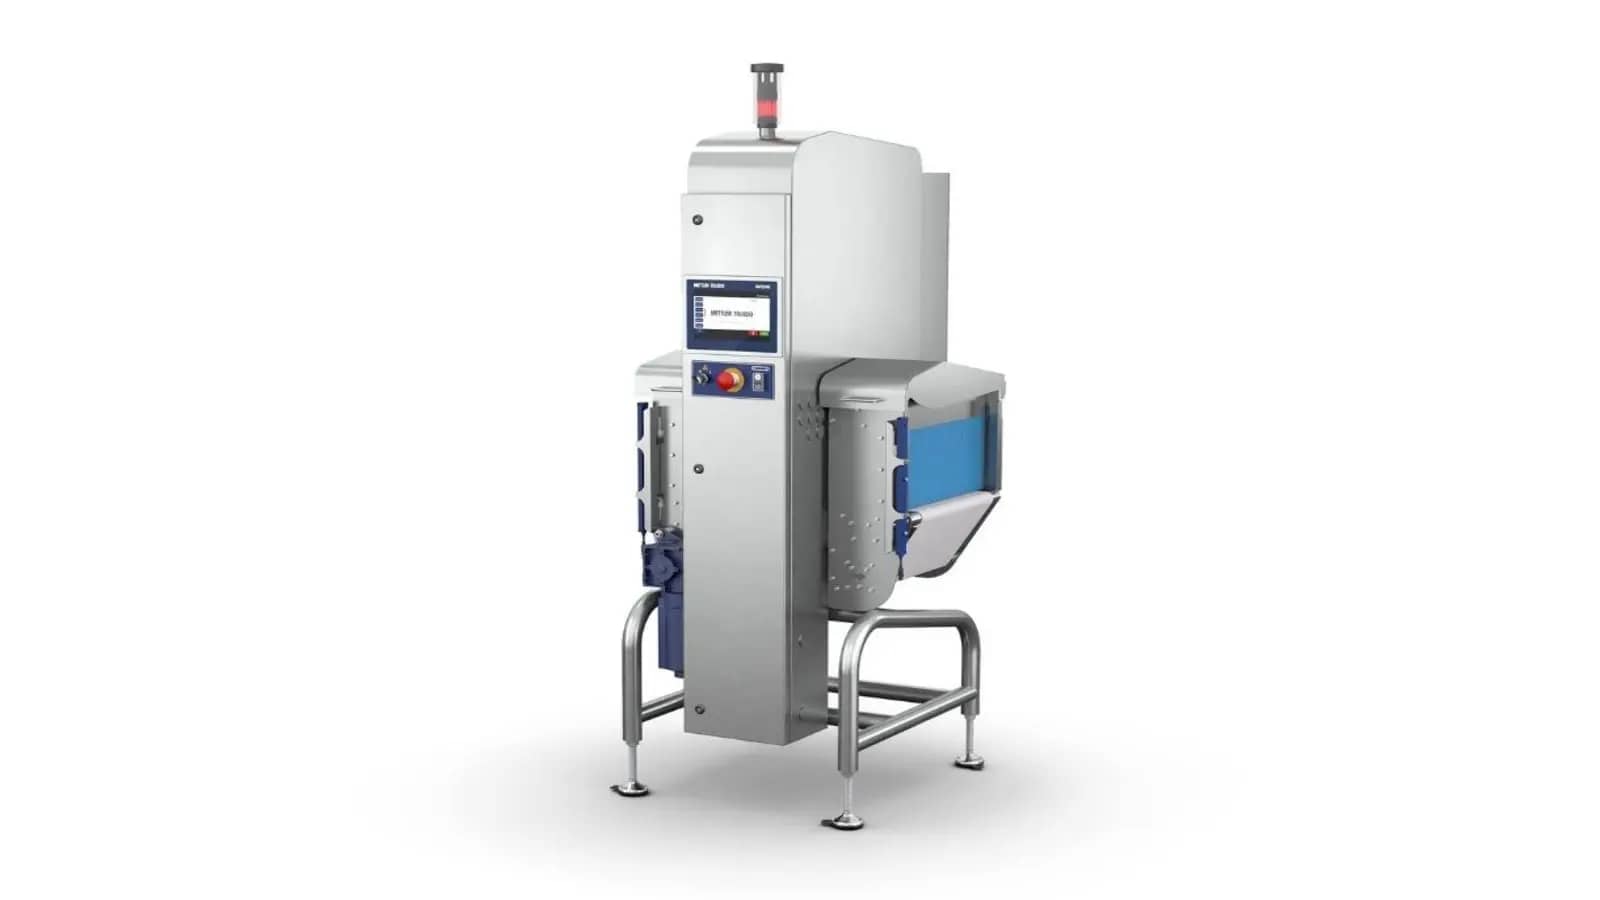 Mettler Toledo unveils new x-ray inspection system for high-speed detection of contaminants 